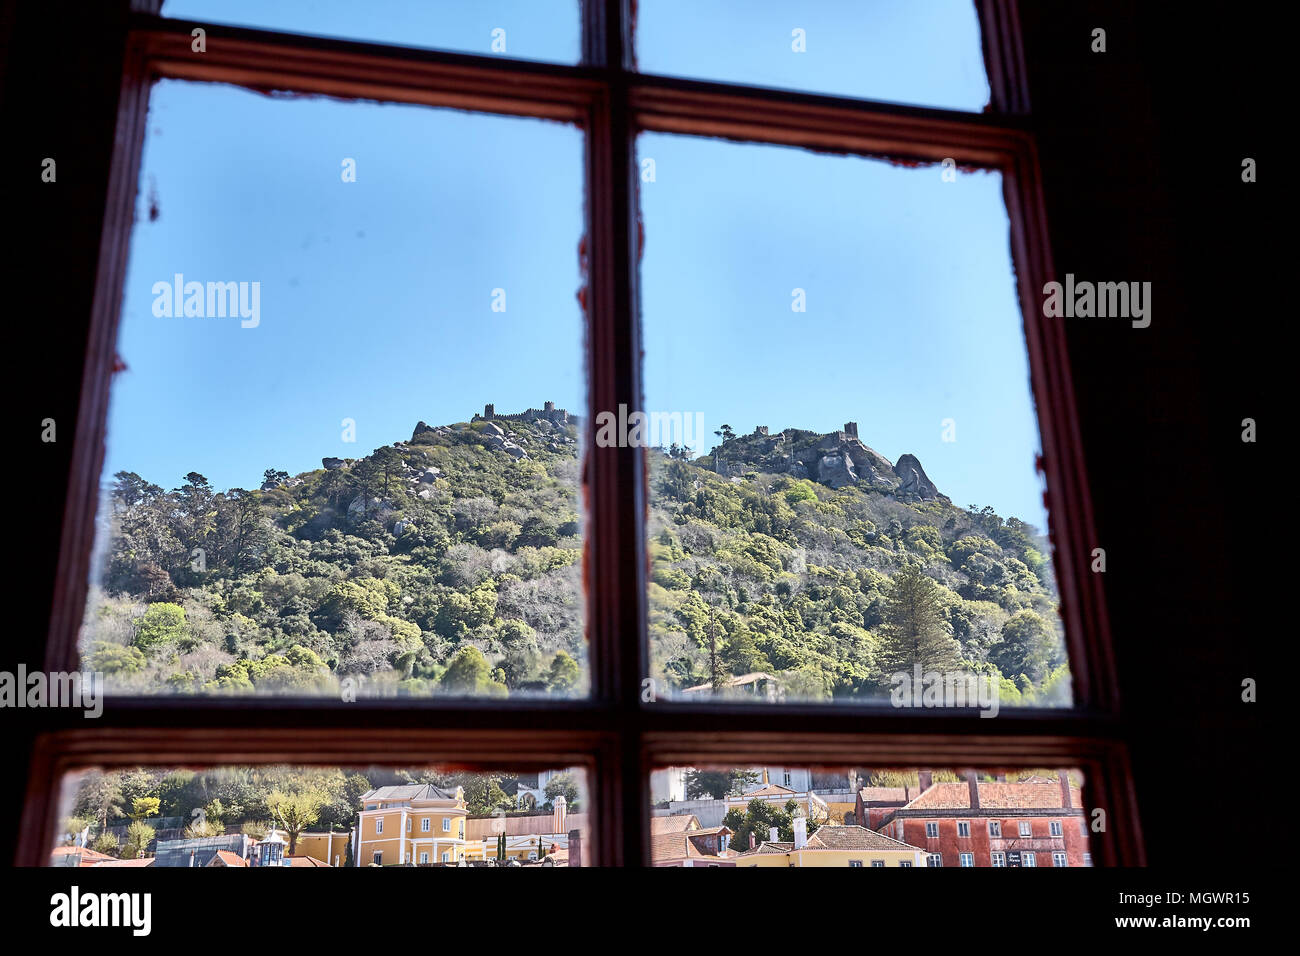 Worms eye view of the impressive Palace da Pena over the hill in Sintra, Lisbon. Portugal. summer spring. Window view Stock Photo